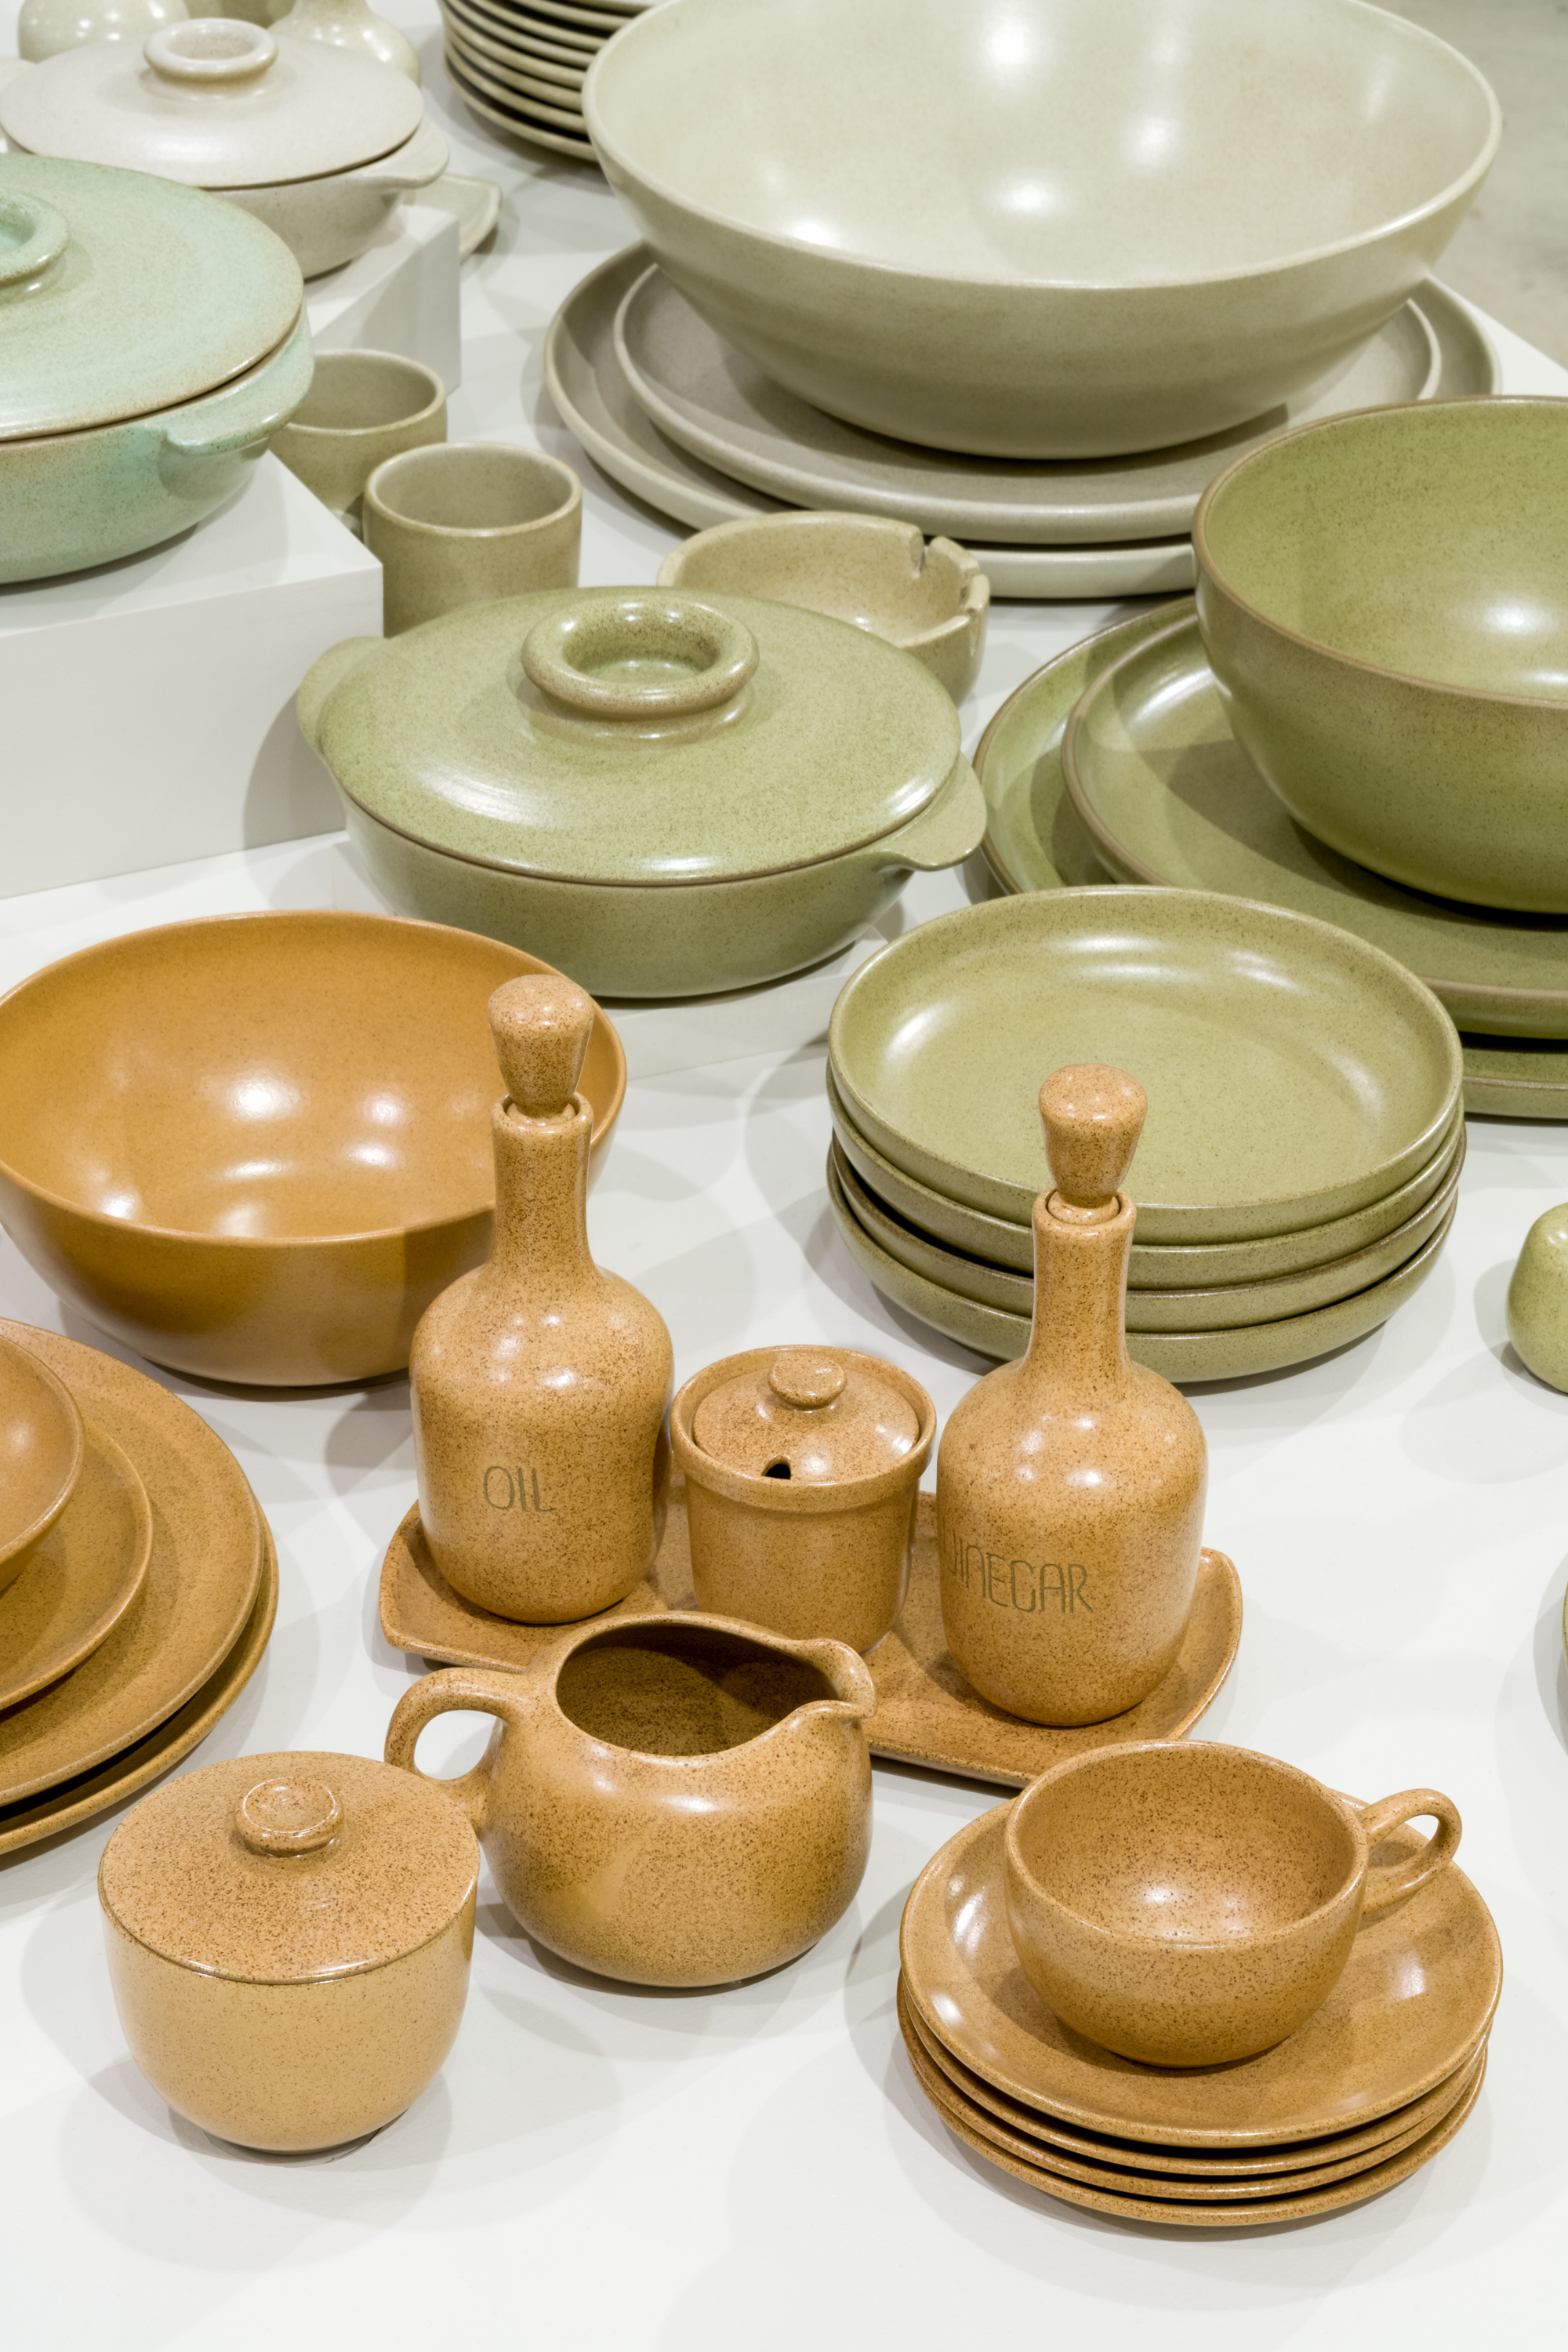 Oil and Vinegar set, bowls, plates, and jar in light orage dinnerware with light green dinnerware in the background.